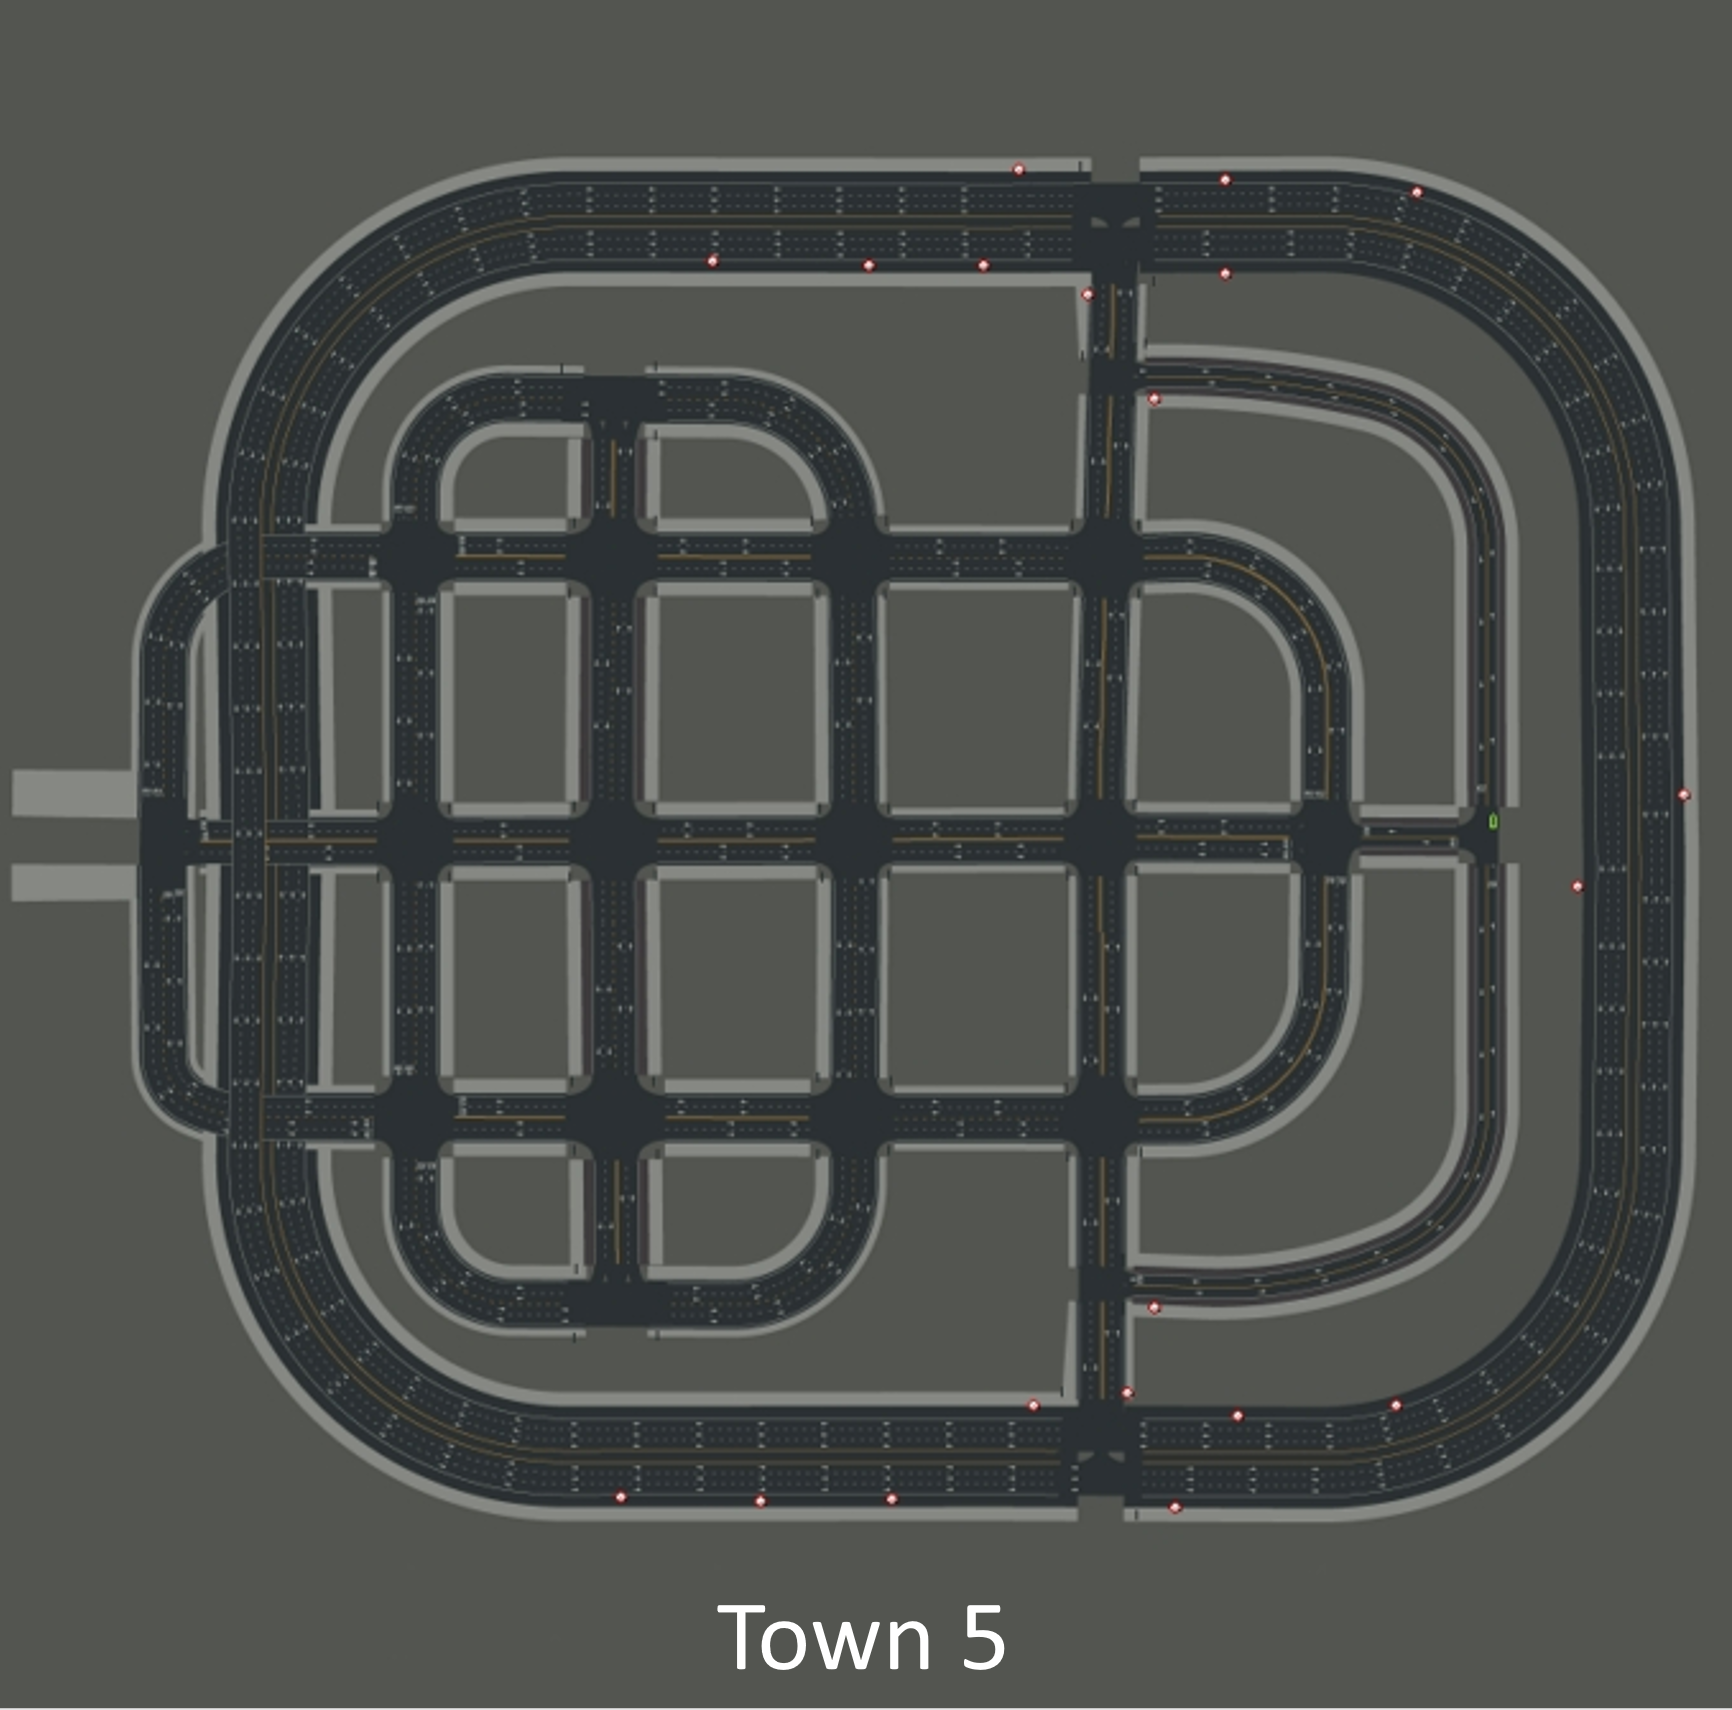 Town 5